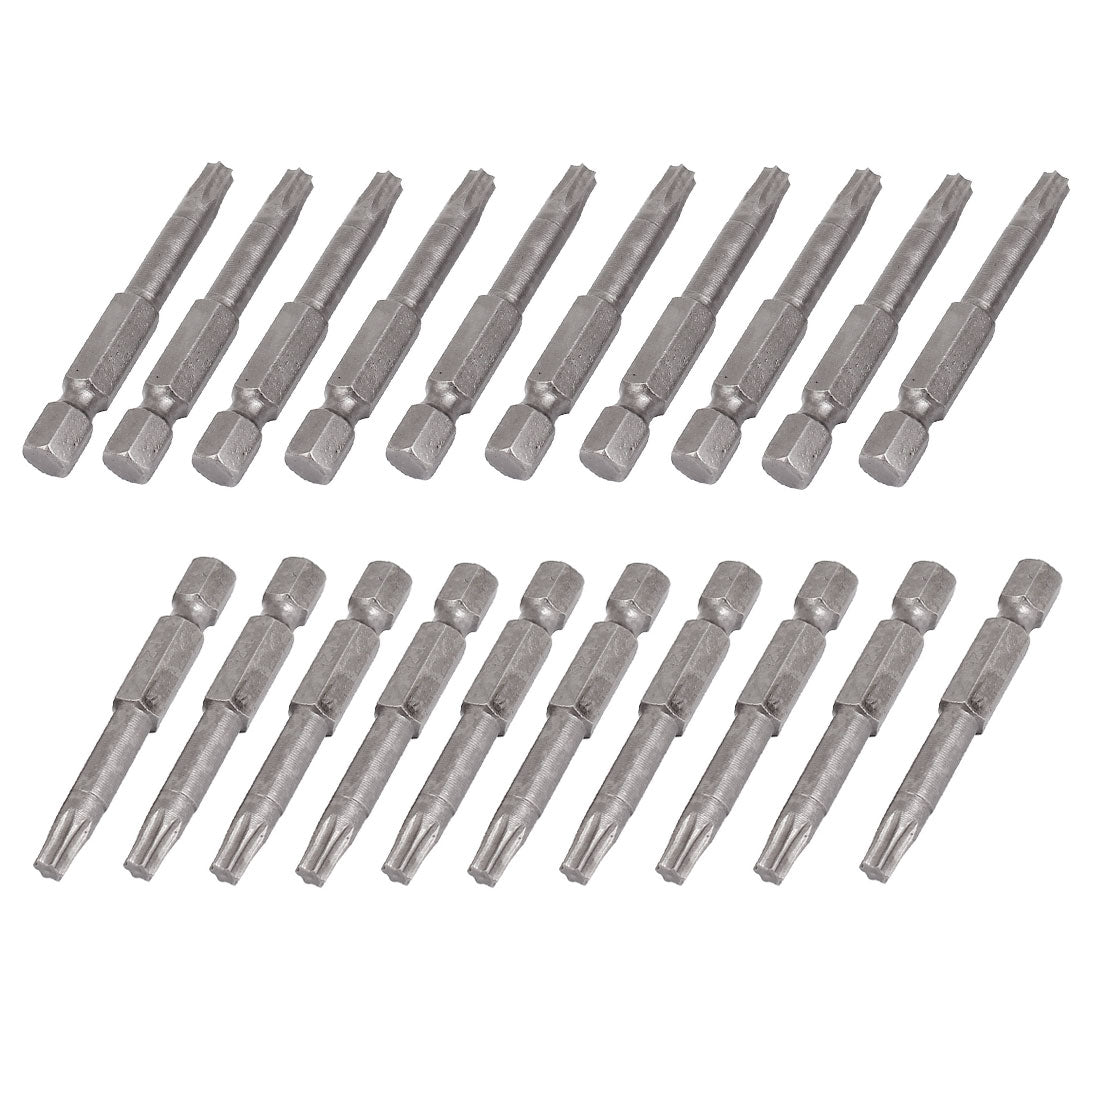 uxcell Uxcell T25 Tip 1/4" Hex Shank 50mm Long Magnetic Torx Screwdriver Bits Gray 20pcs